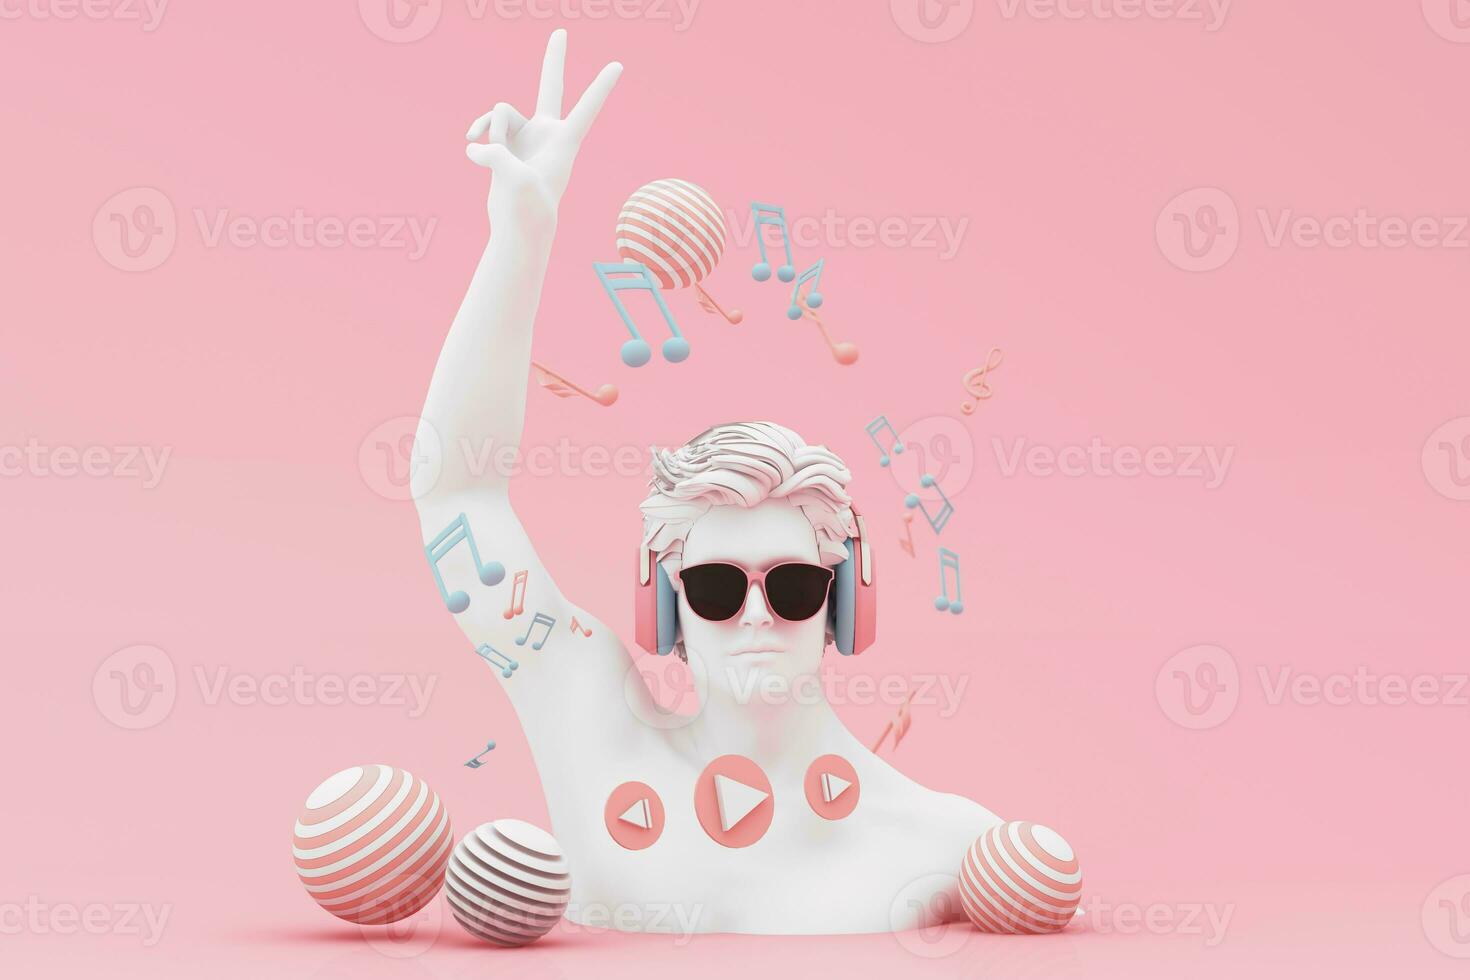 Headphones and smartphone with music notes floating on pink background surrounded by Speaker with musical instruments. concept of fun song or music festival with human head sculpture. 3d rendering photo